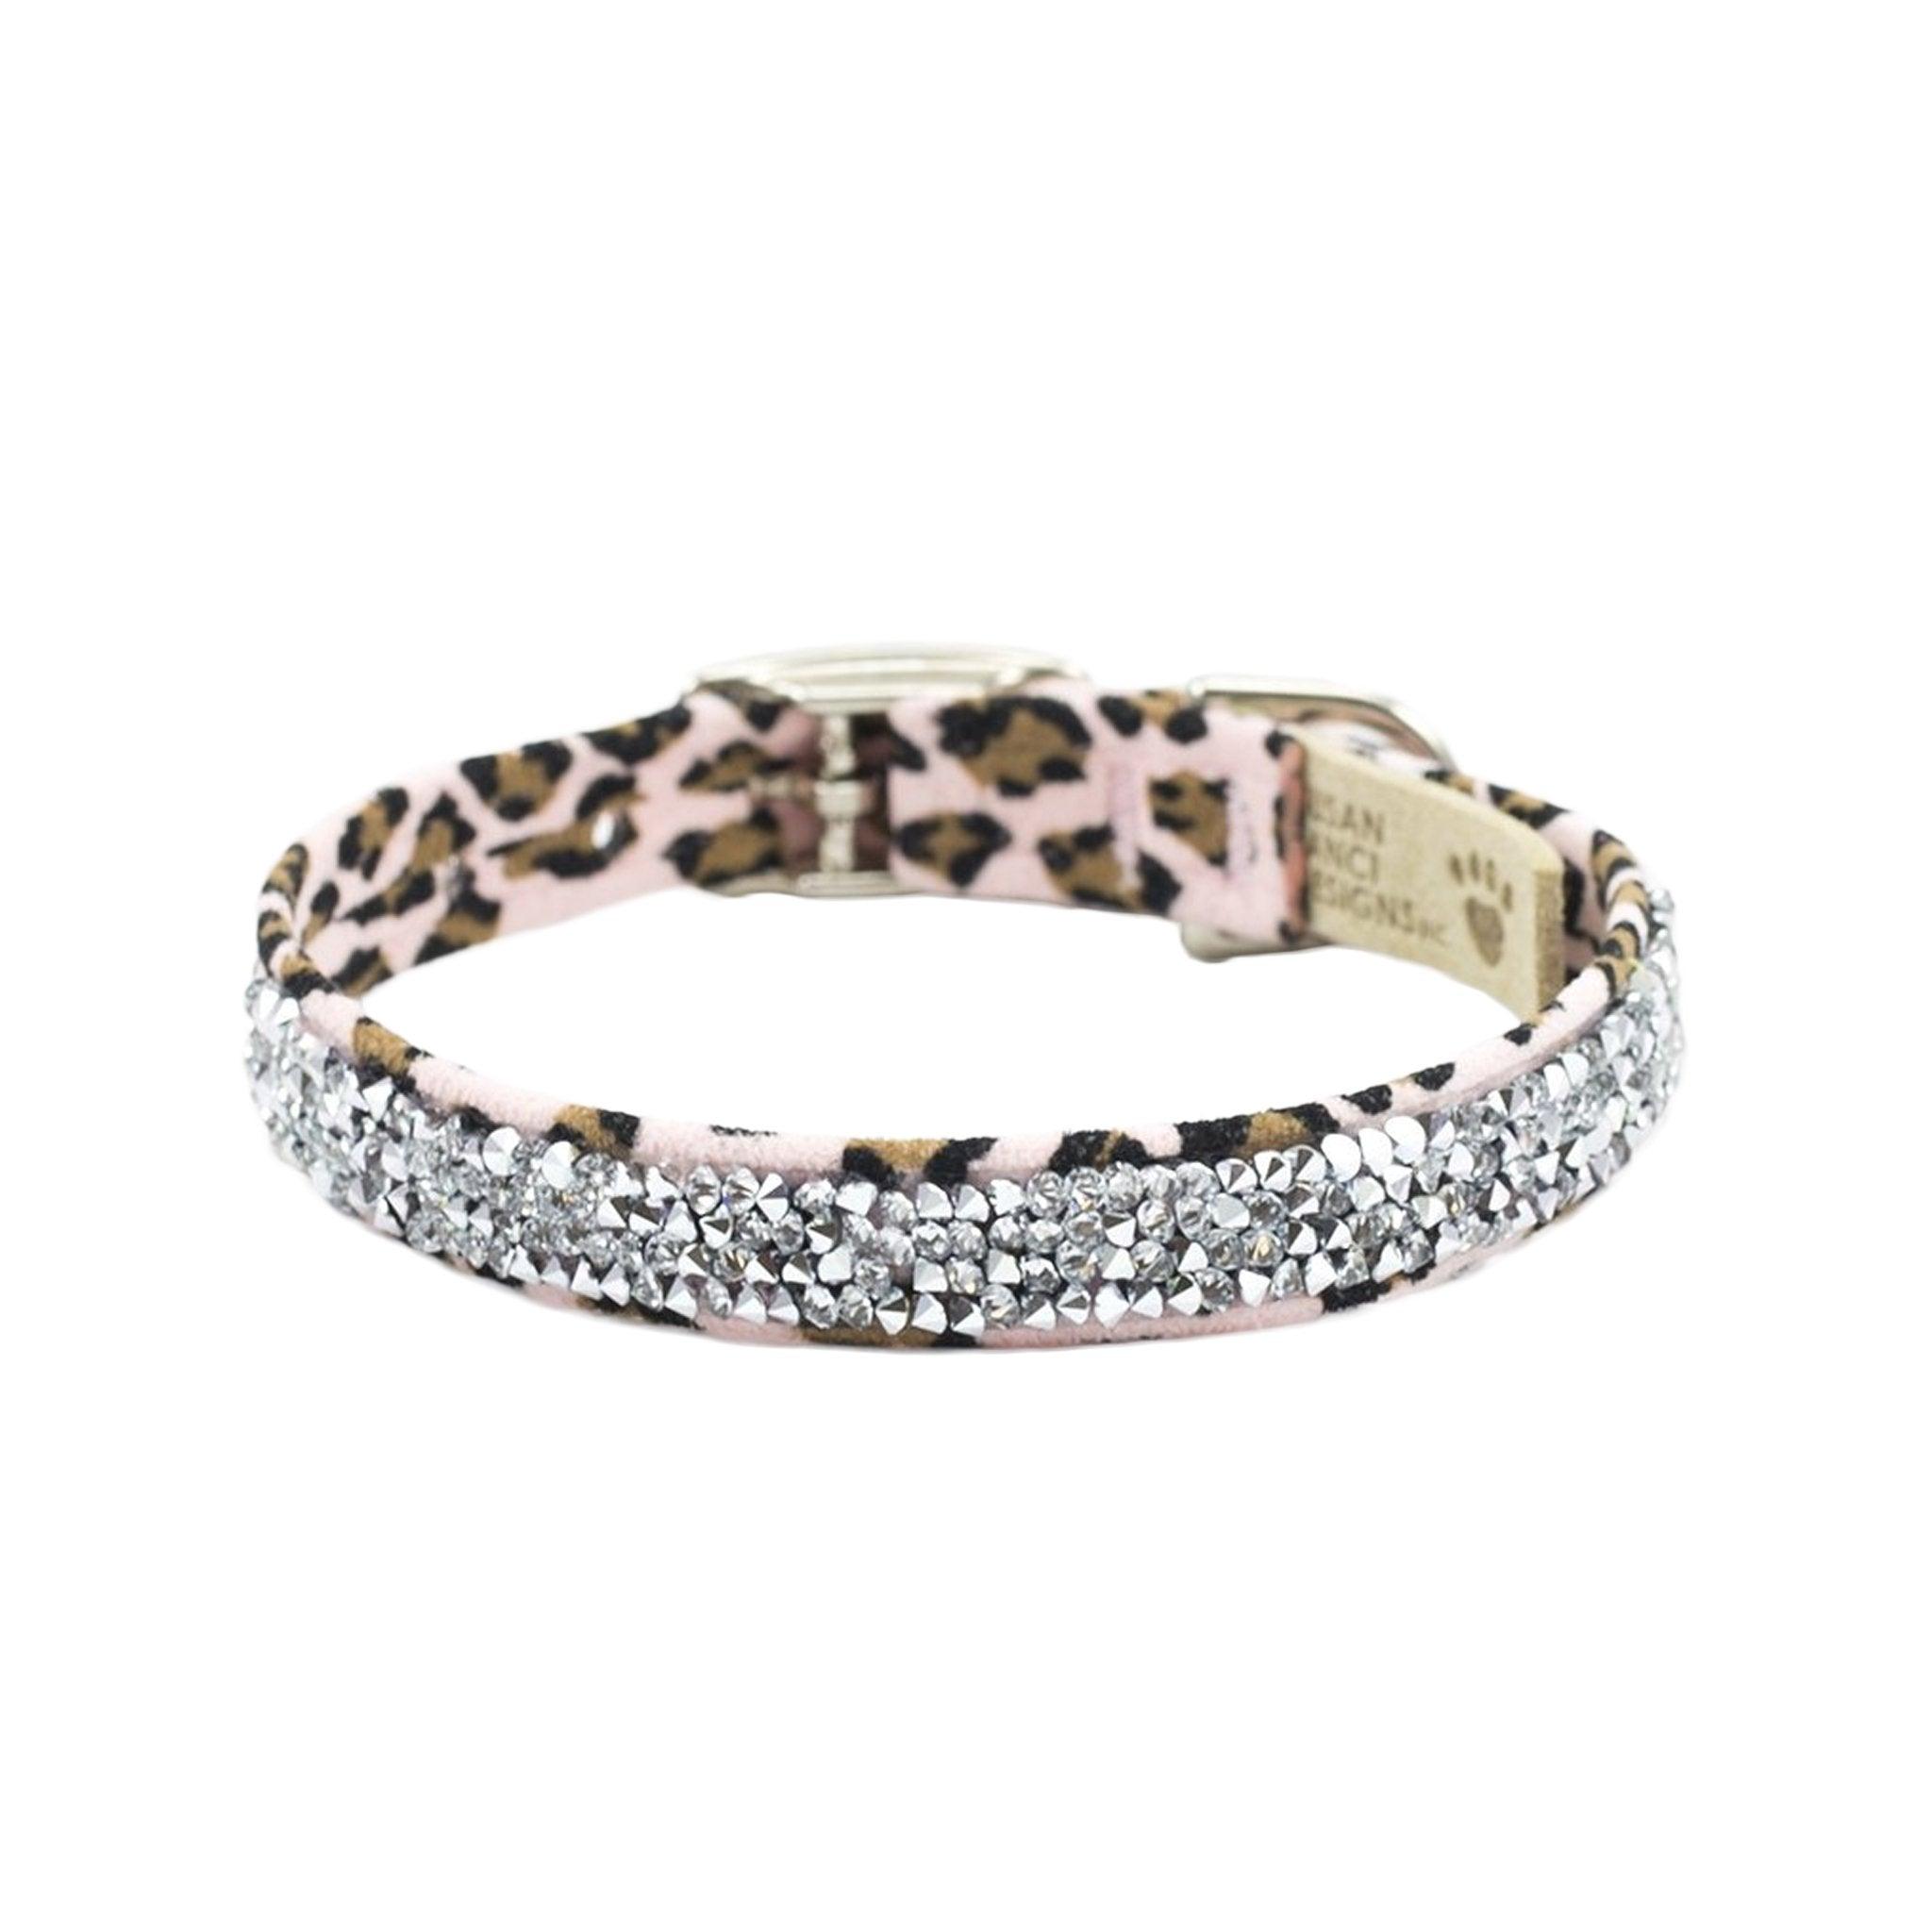 Cheetah Couture Crystal Rocks Collar - Rocky & Maggie's Pet Boutique and Salon